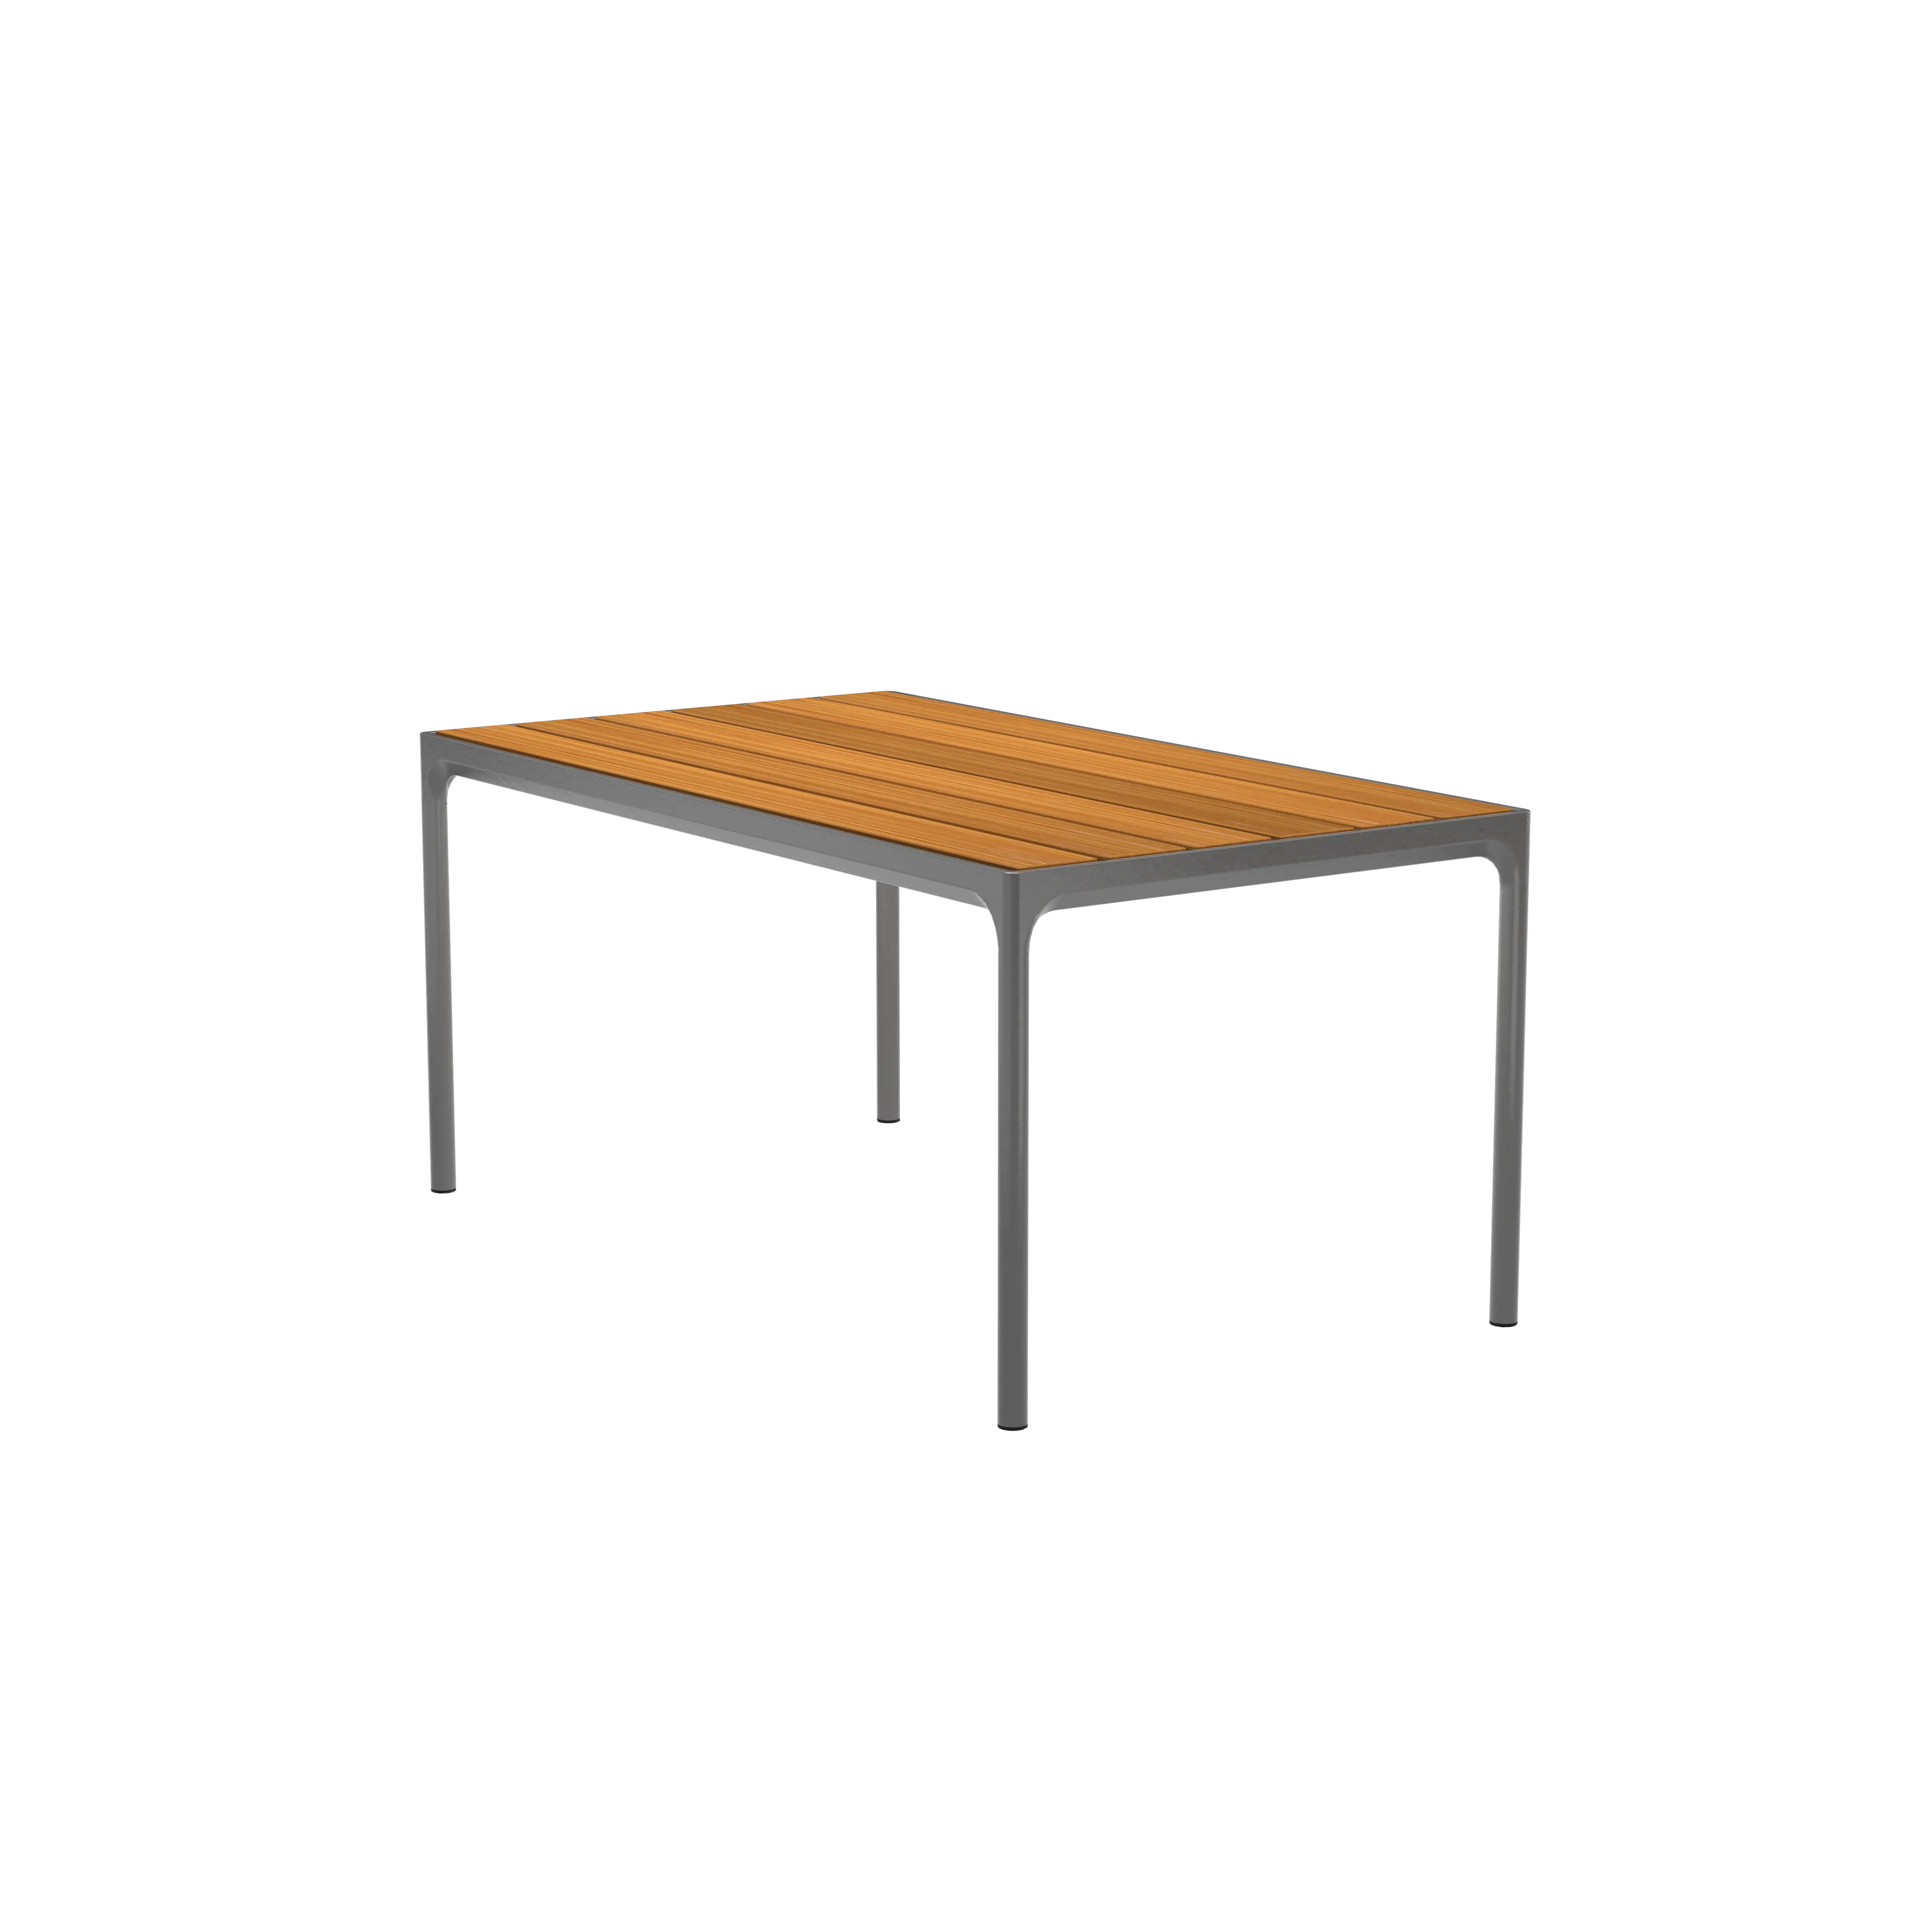 Four dining table 90 x 160 cm - Bamboo, grey